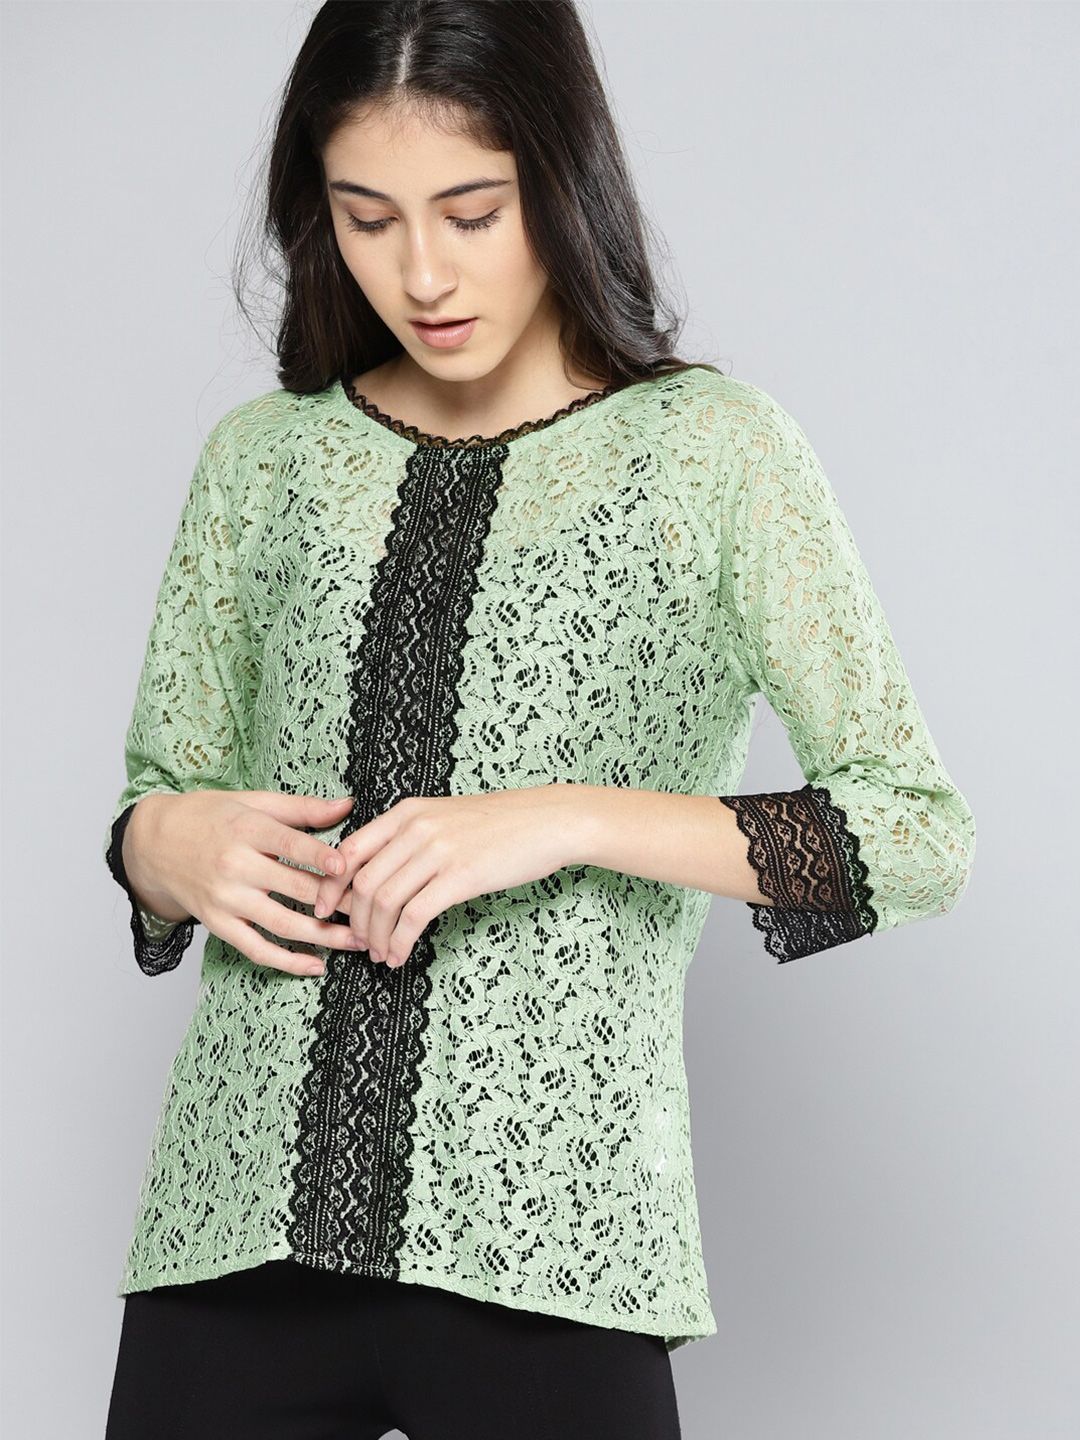 Mast & Harbour Green Self Design Lace Top Price in India